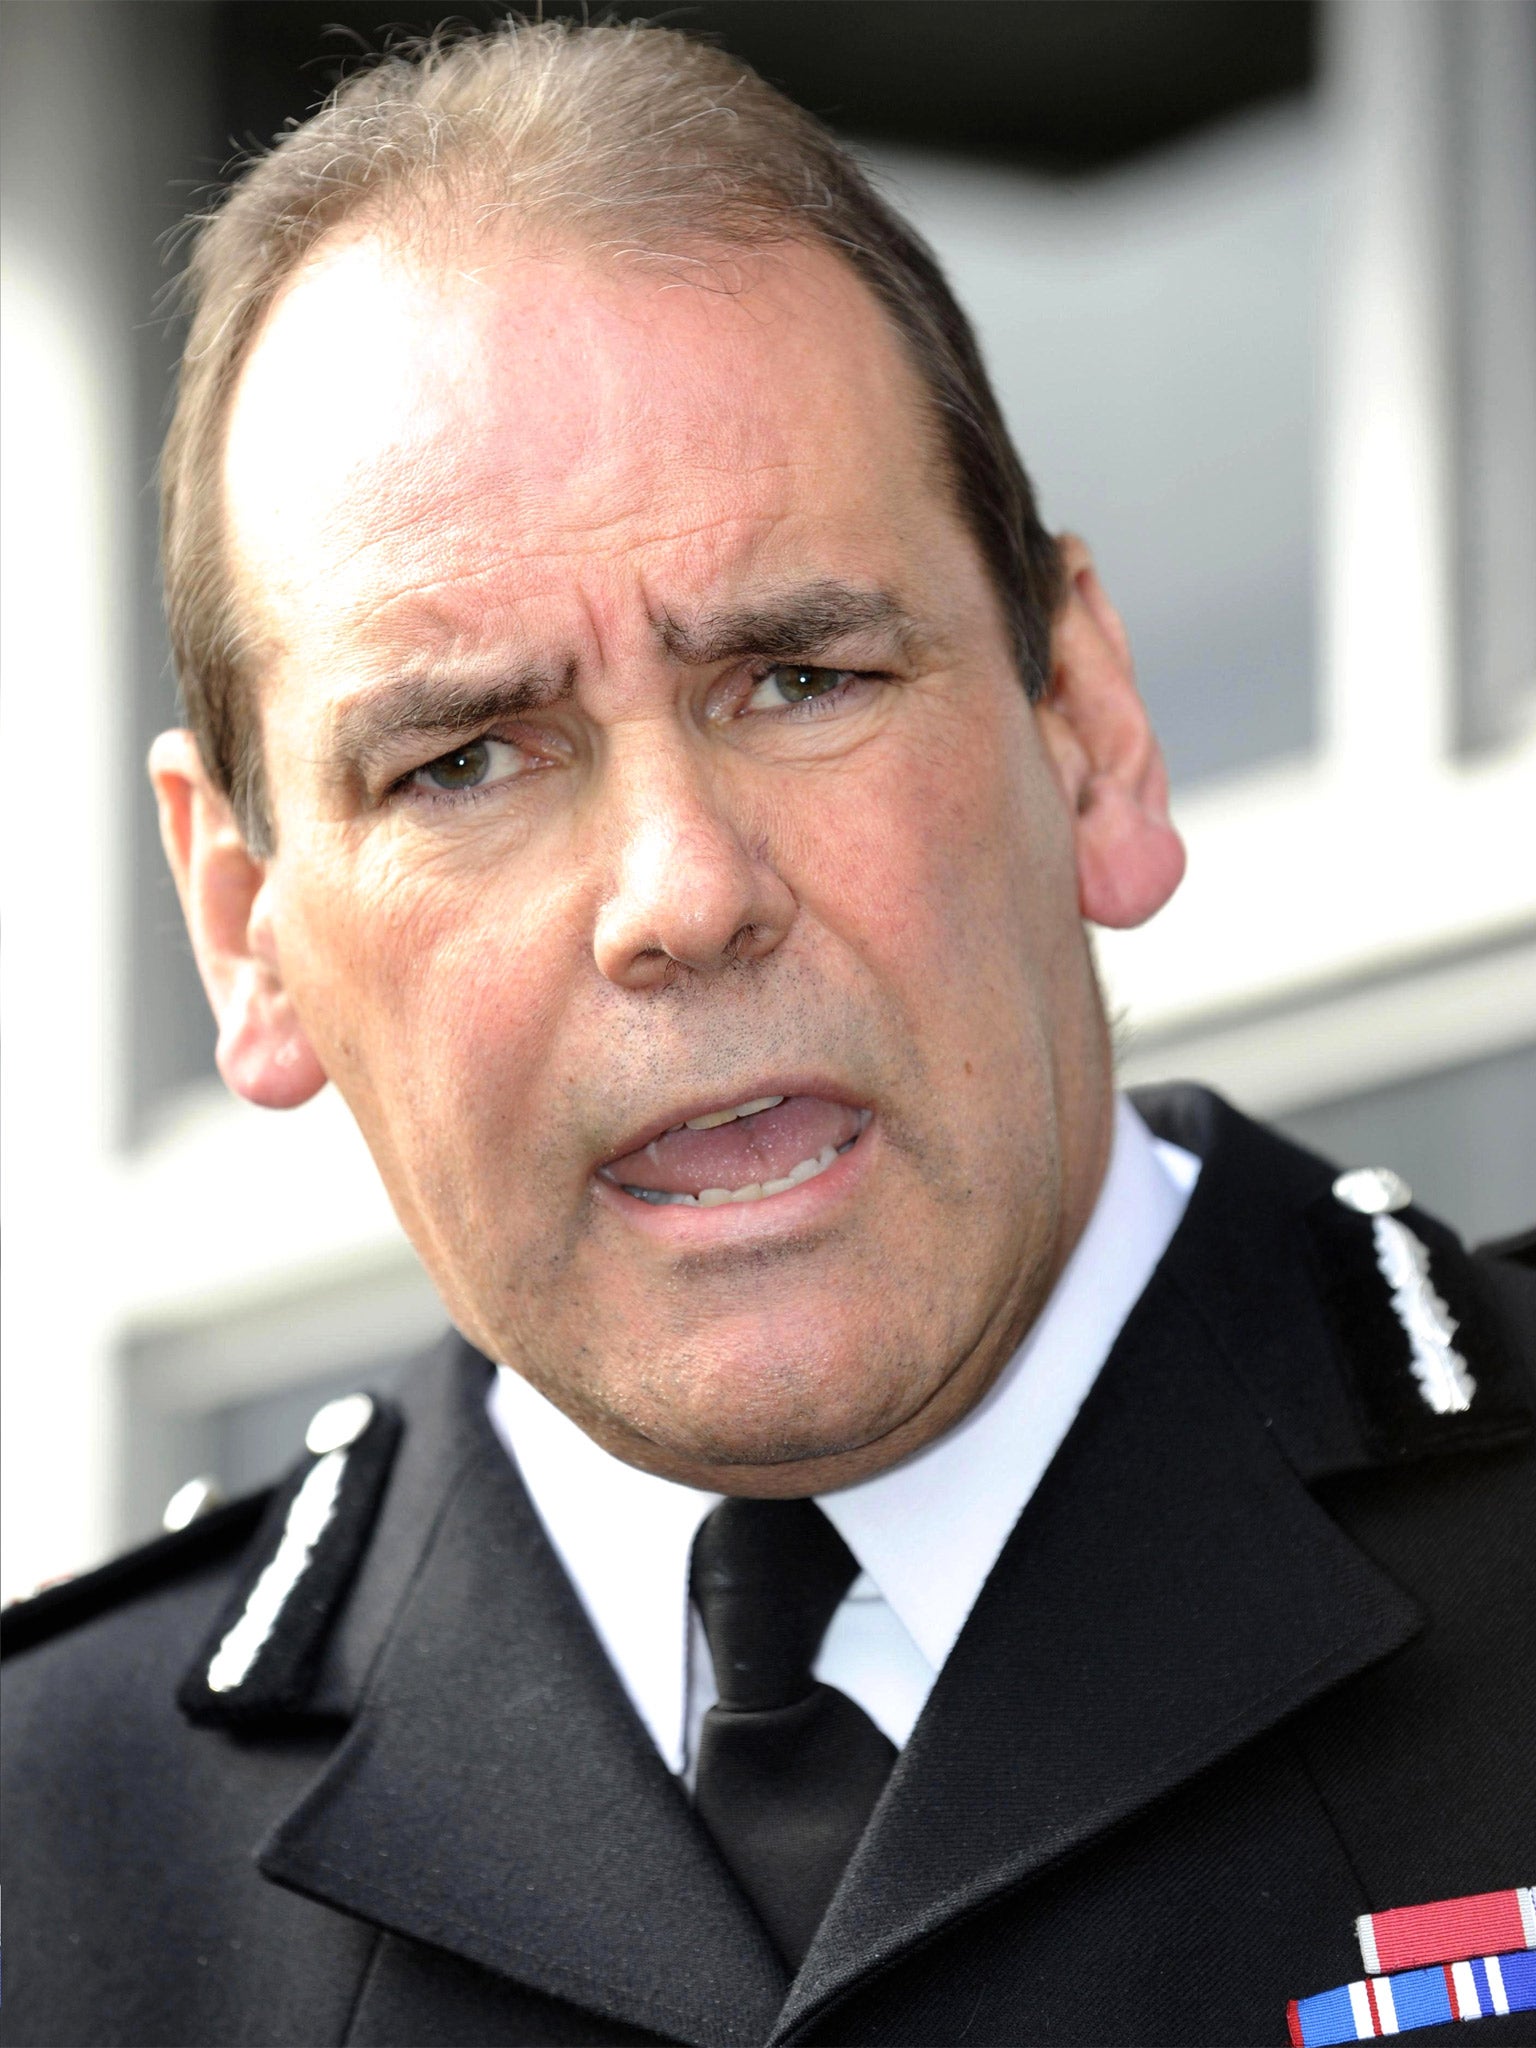 Sir Norman Bettison, former Chief Constable of West Yorkshire Police